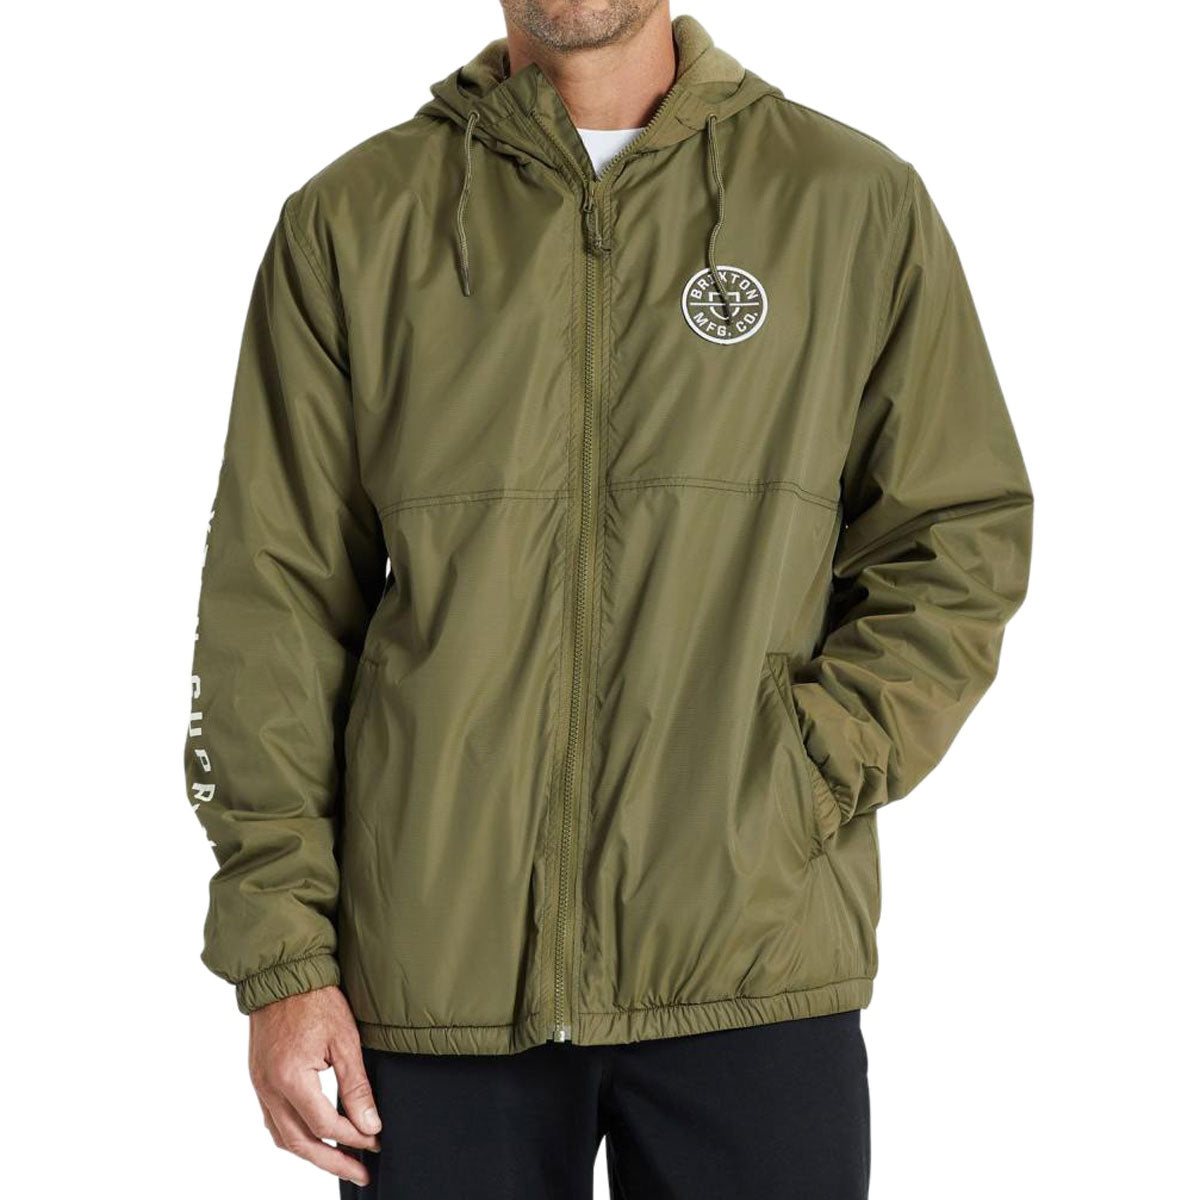 Brixton Claxton Crest Lined Jacket - Military Olive image 1